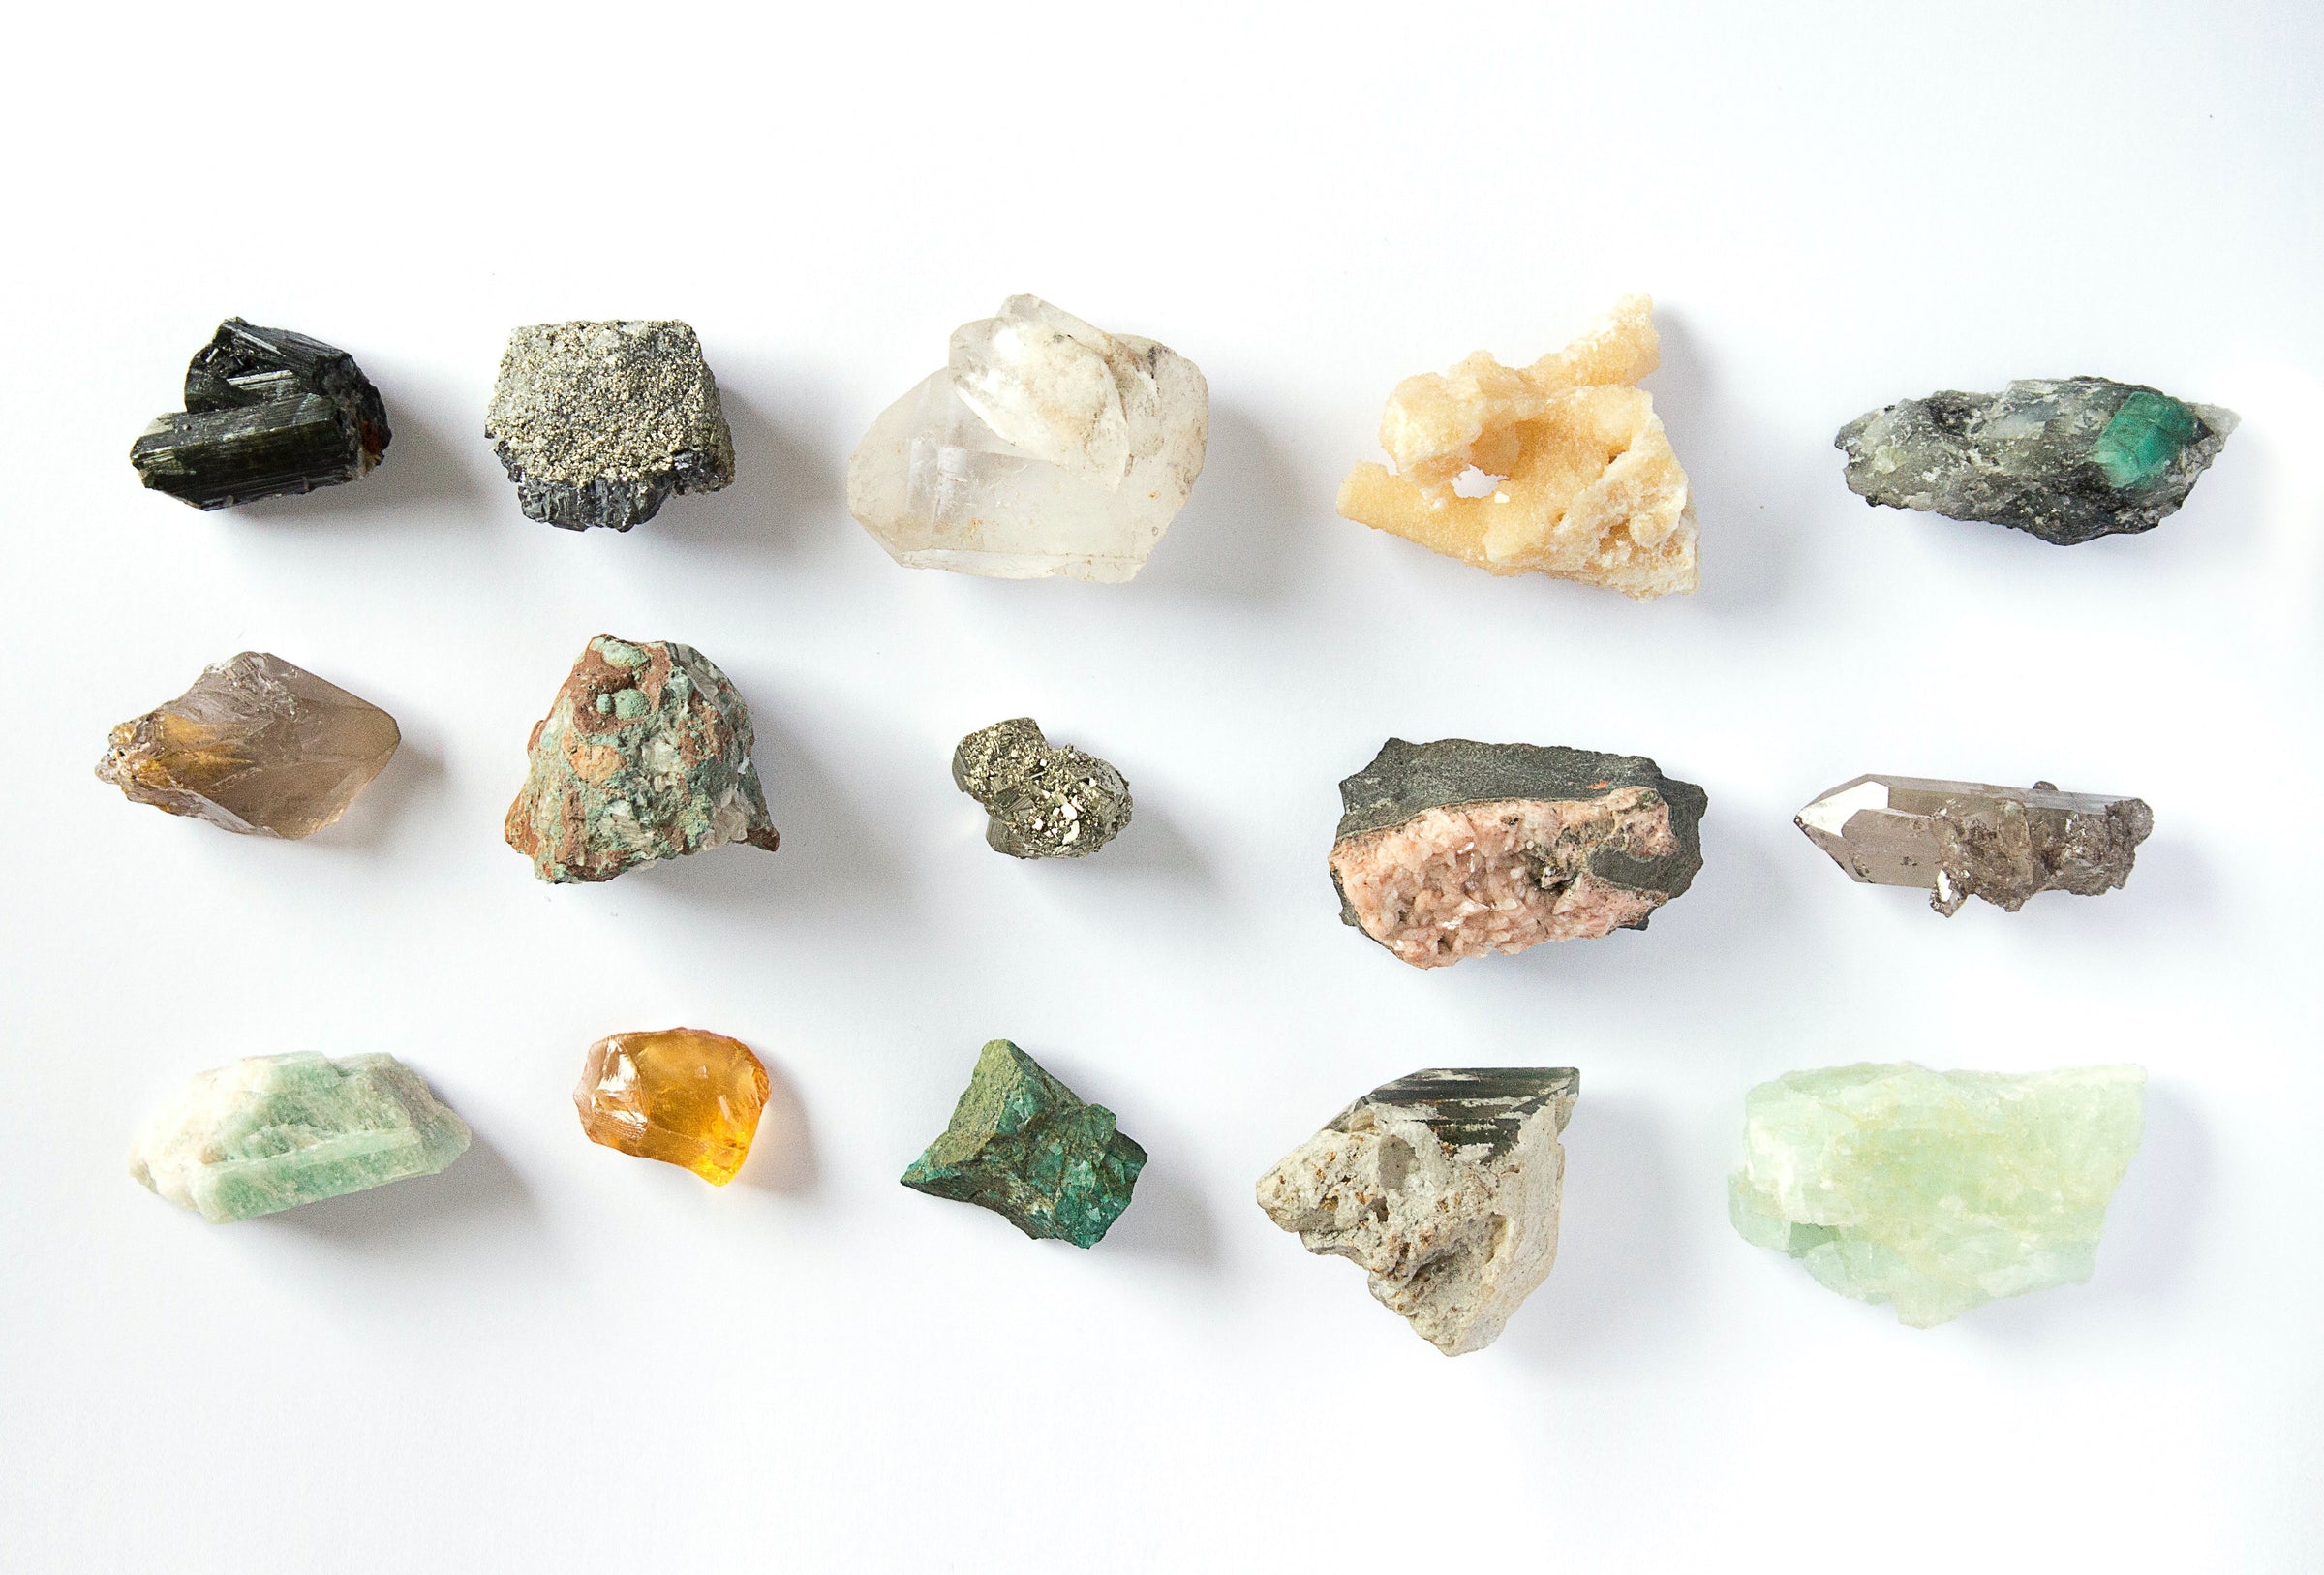 How to Choose Your Healing Crystals - The Complete Guide - Rocks